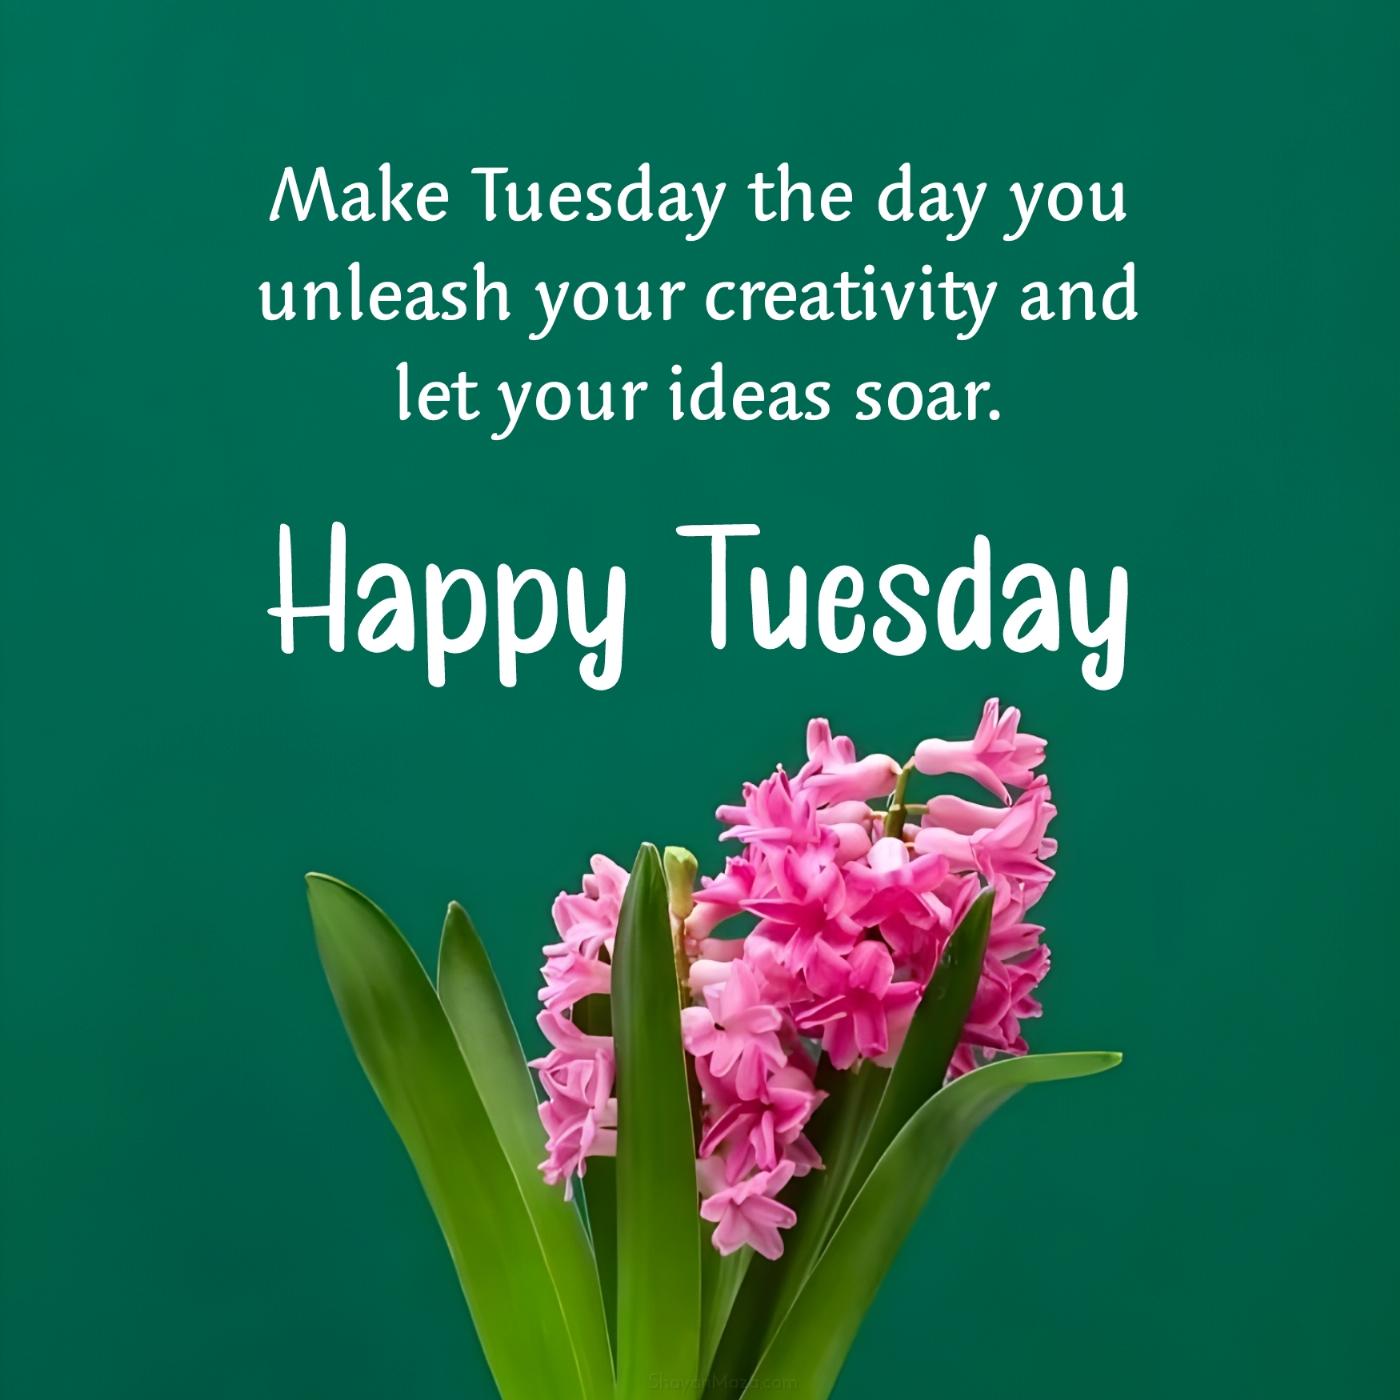 Make Tuesday the day you unleash your creativity and let your ideas soar